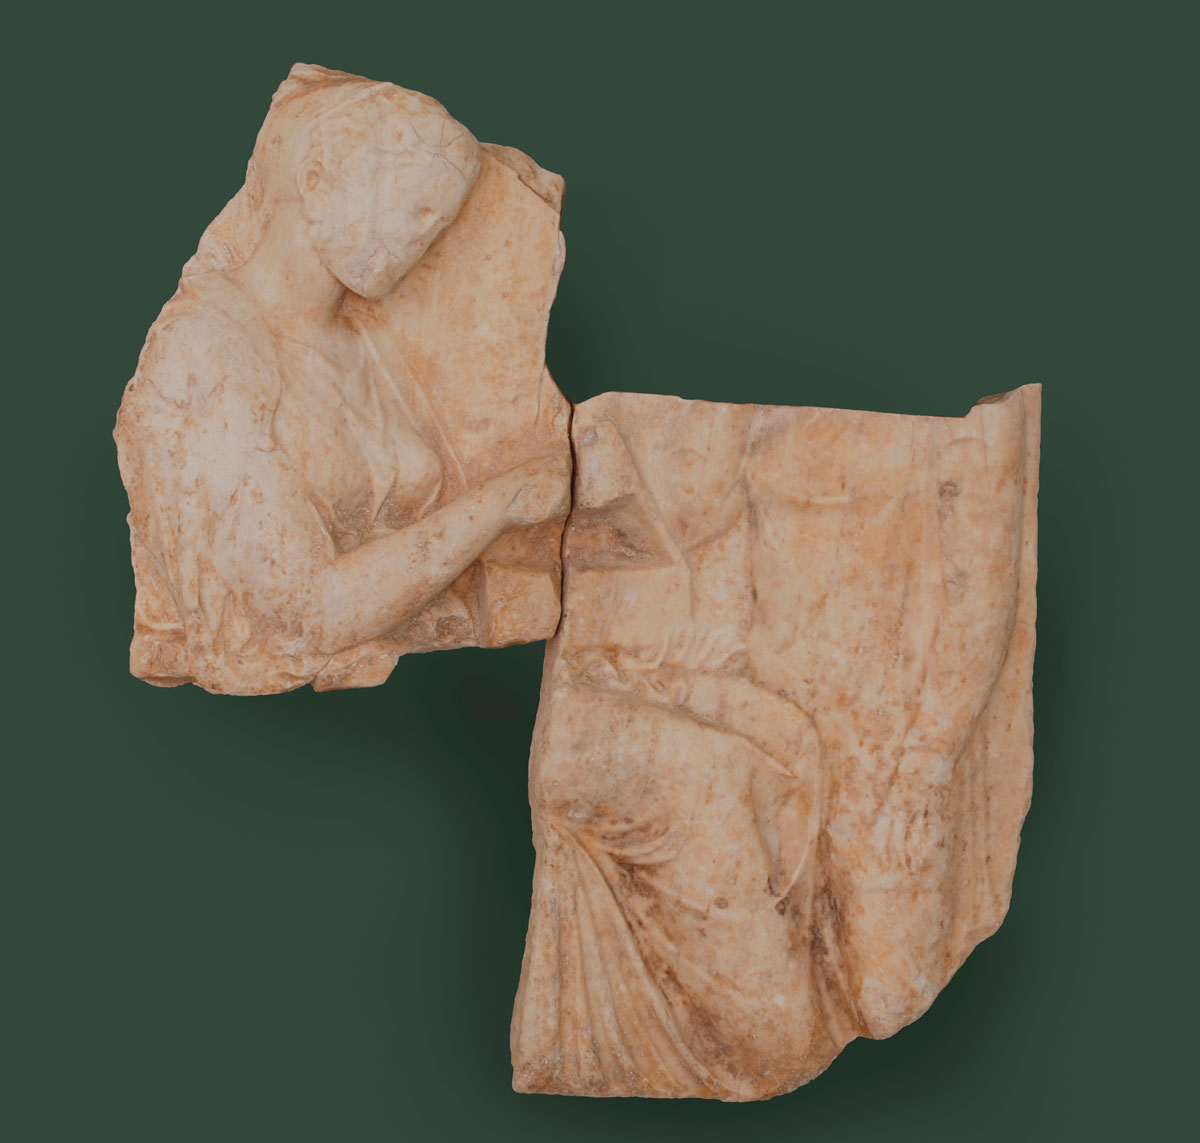 Fig. 3. Two sections of a funerary relief bought by the Getty Museum in the 1970s and proved to be part of a third in the collections of the Kanellopoulos Museum. They were repatriated in March 2012. (©YPPOA/DTPPA)